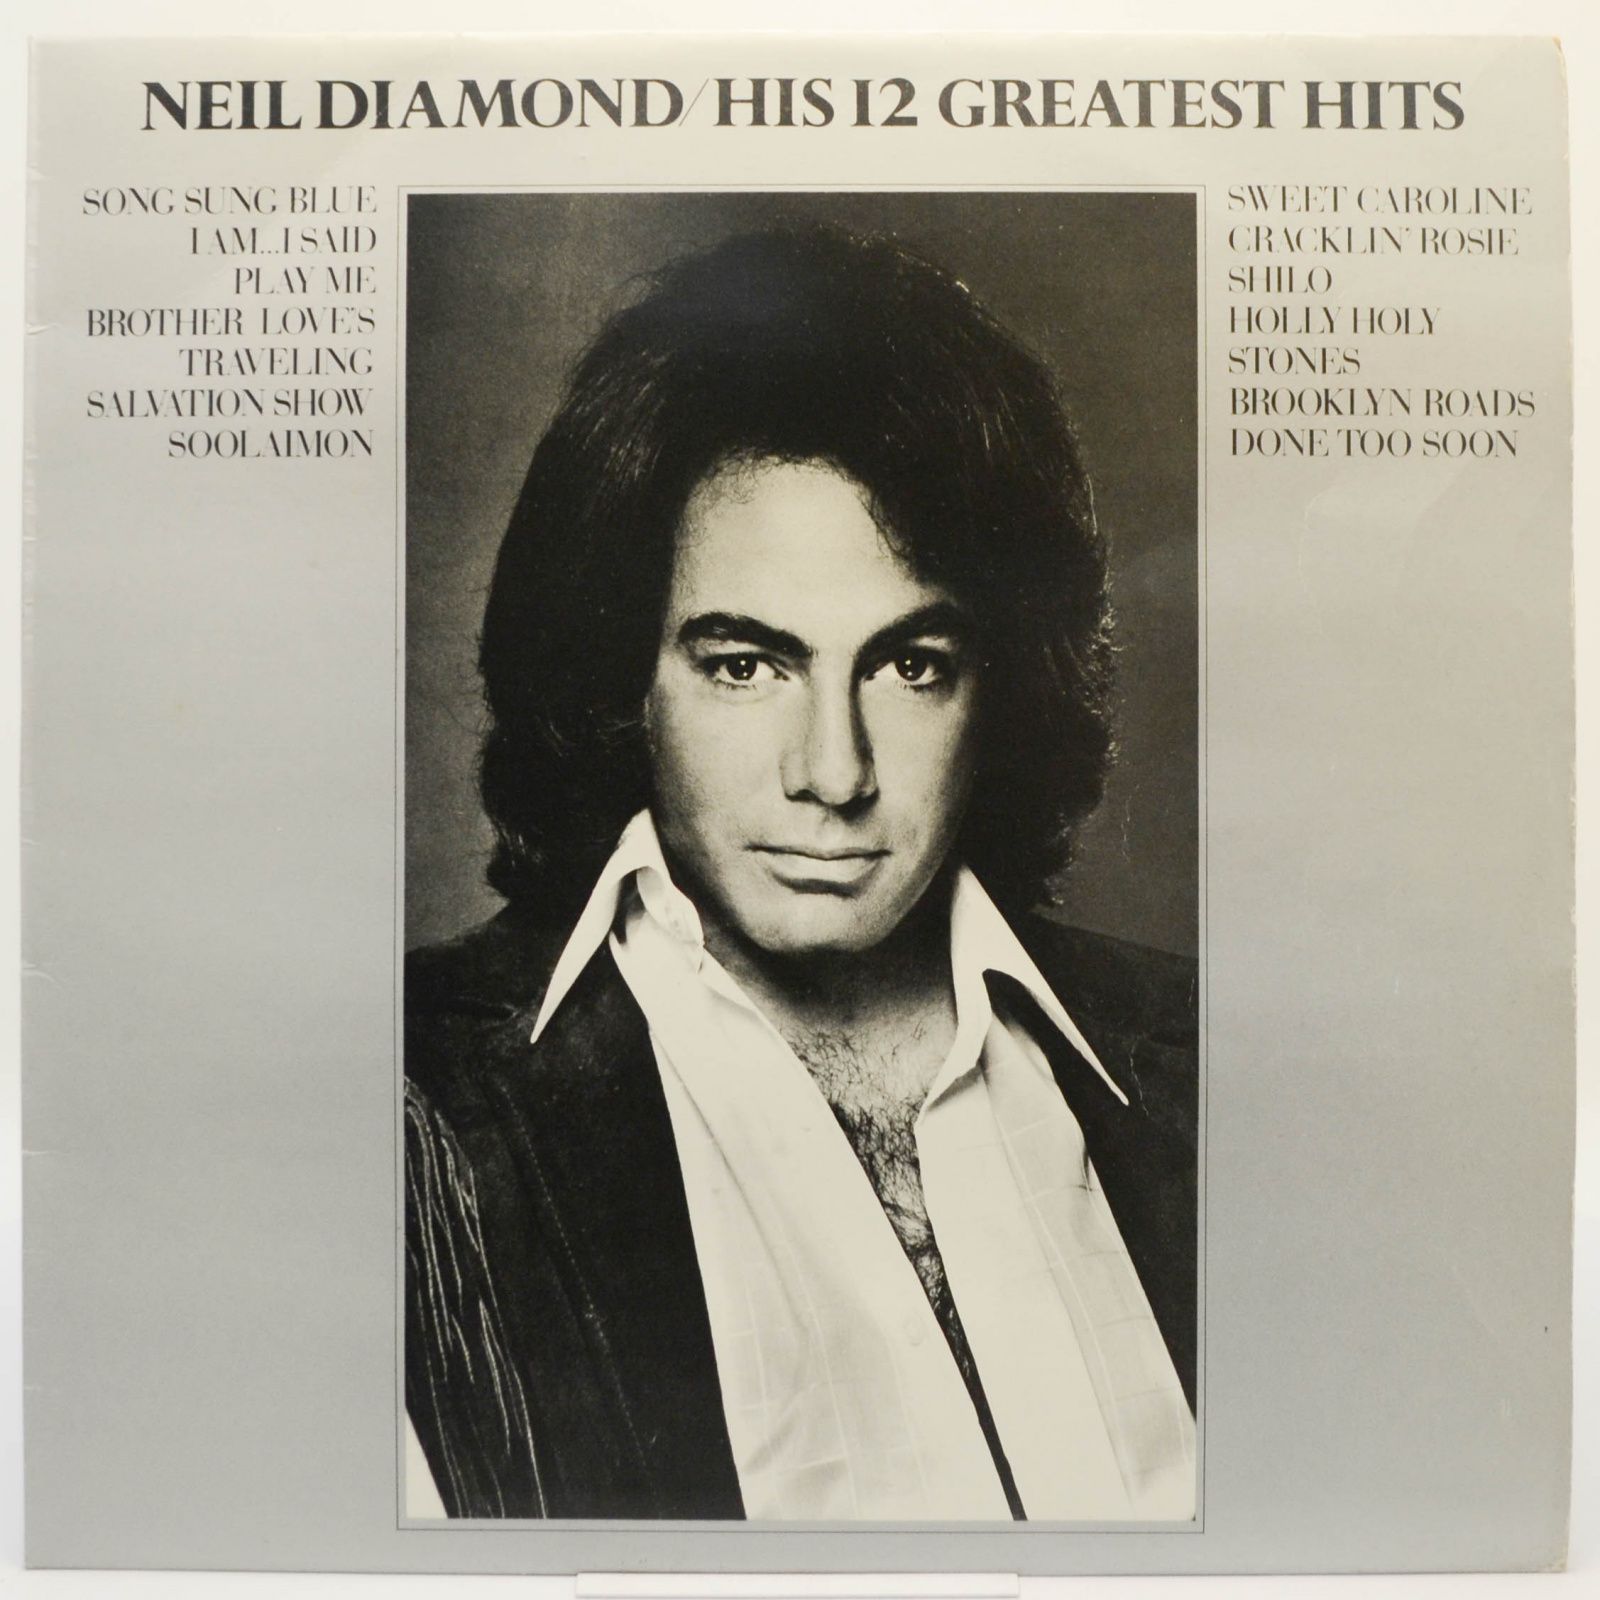 His 12 Greatest Hits, 1974